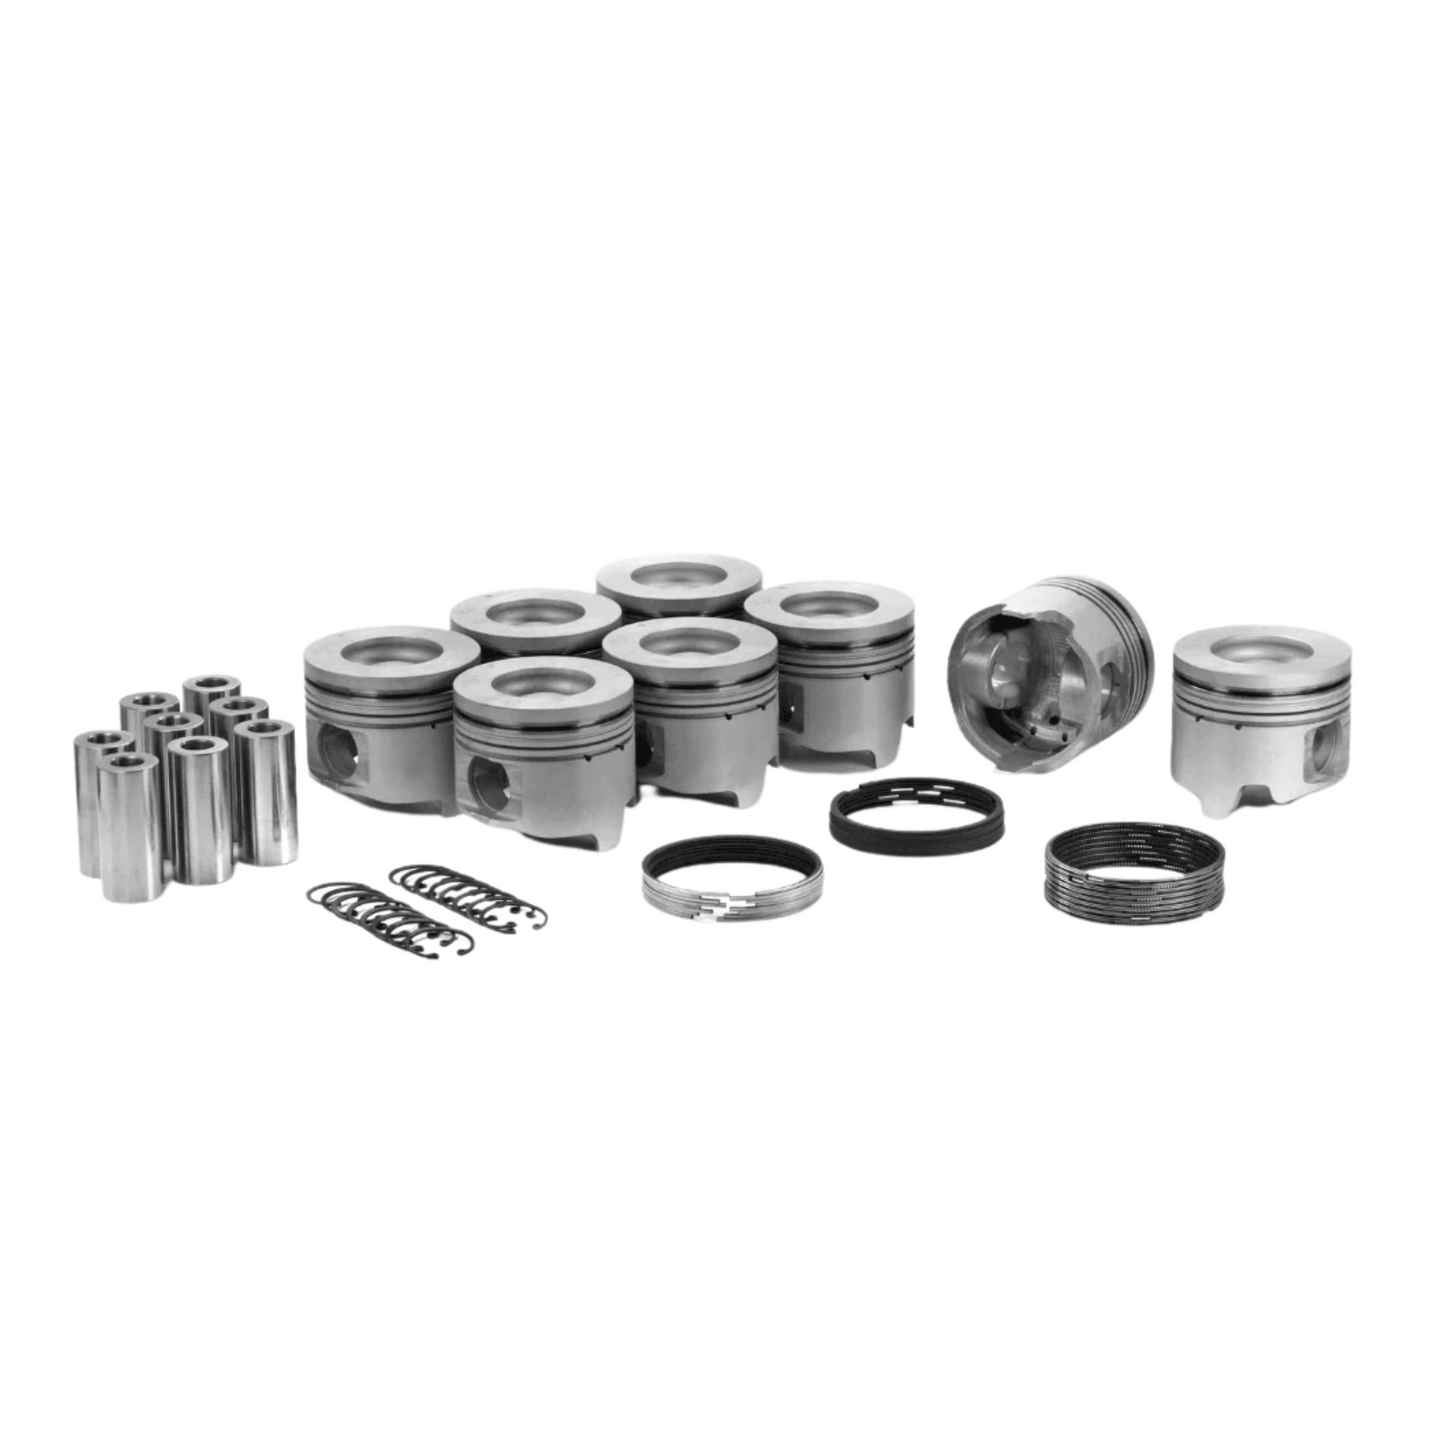 2001-2005 Duramax 6.6L LB7/LLY Dualoy Reduced Compression Height Piston & Ring Kit (7218DKT) -<span style="background-color:rgb(246,247,248);color:rgb(28,30,33);"> Dualoy Pistons </span>